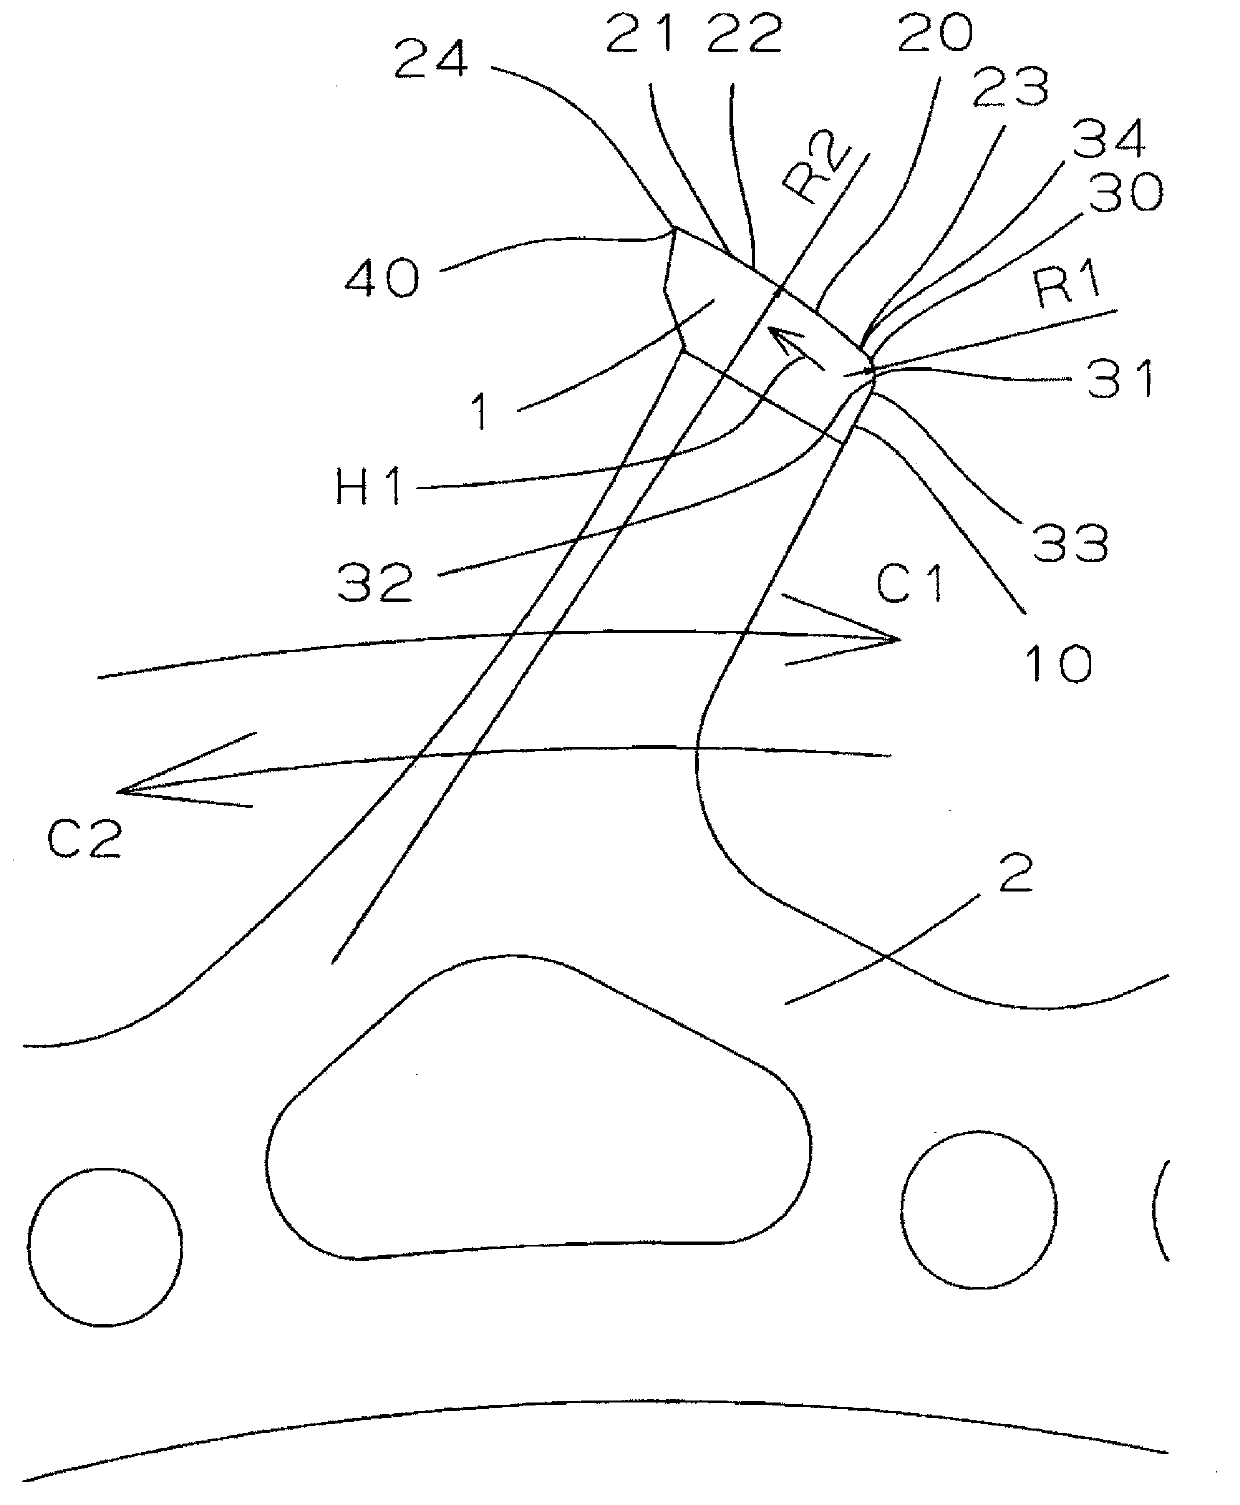 Escapement gear, escapement wheel employing the escapement gear, anchor-shaped escapement, movement, mechanical timepiece and method of torque transmission